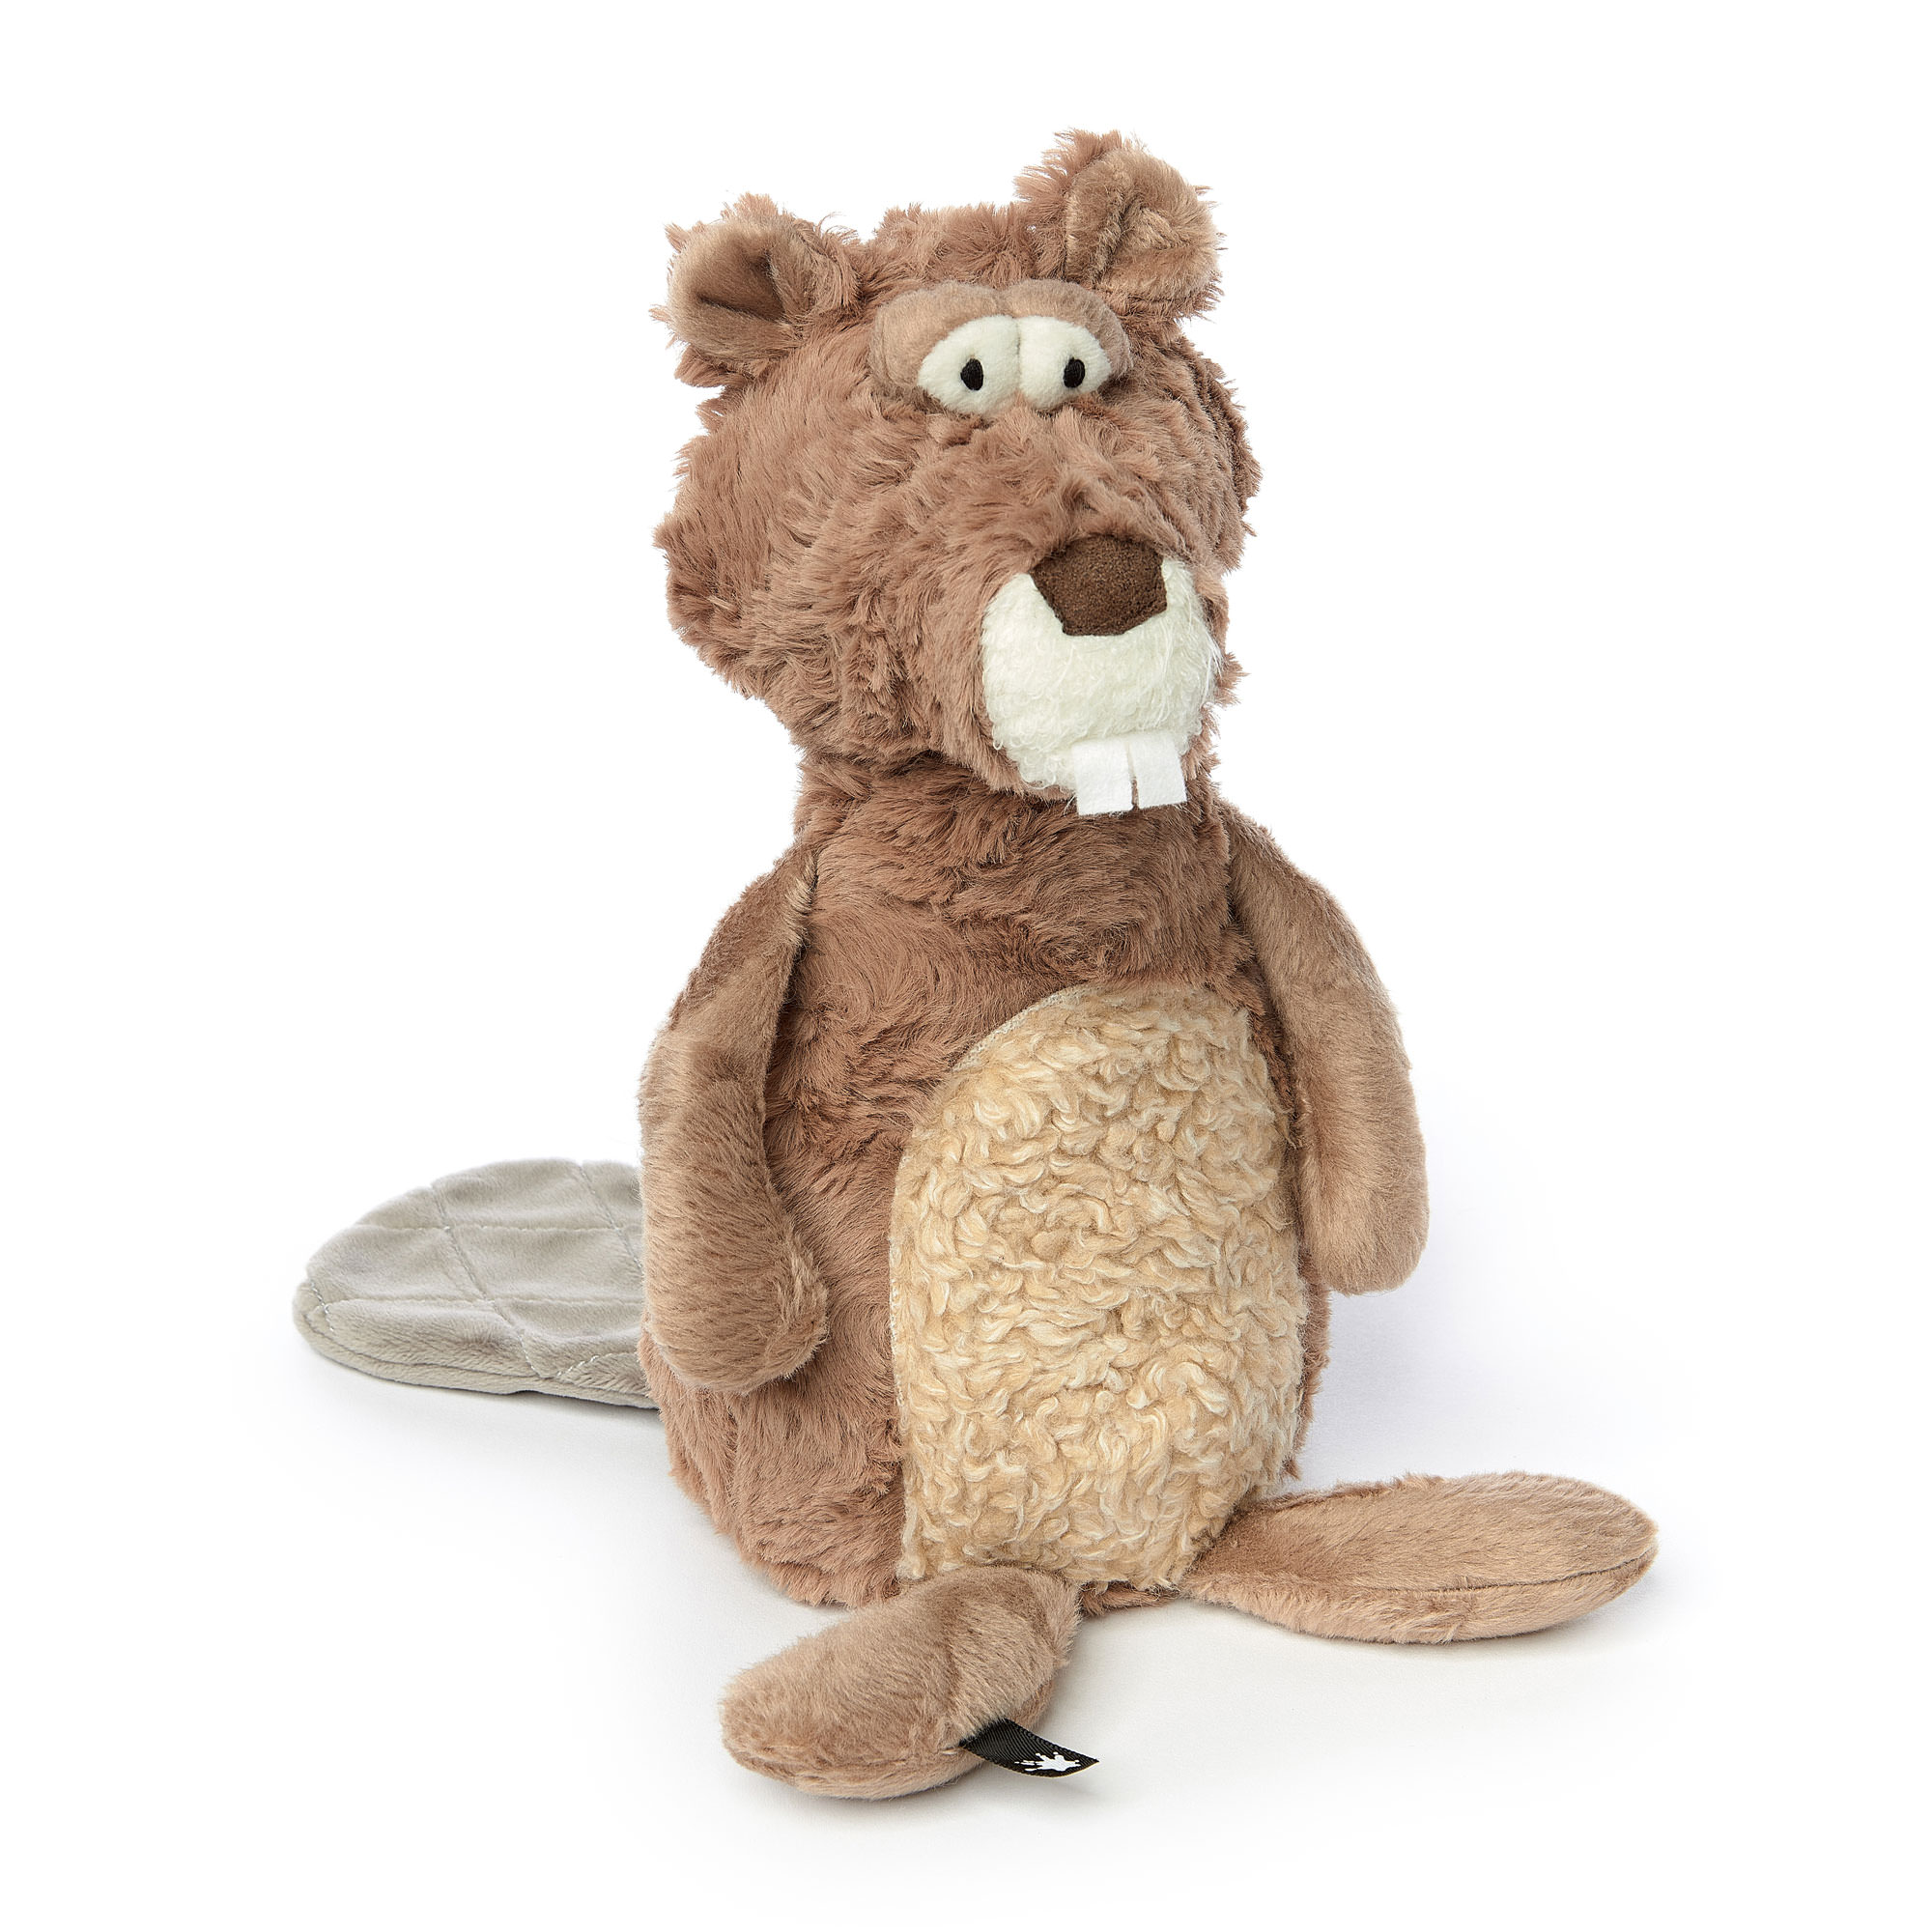 Plush toy beaver Co-Constructor, Beasts collection